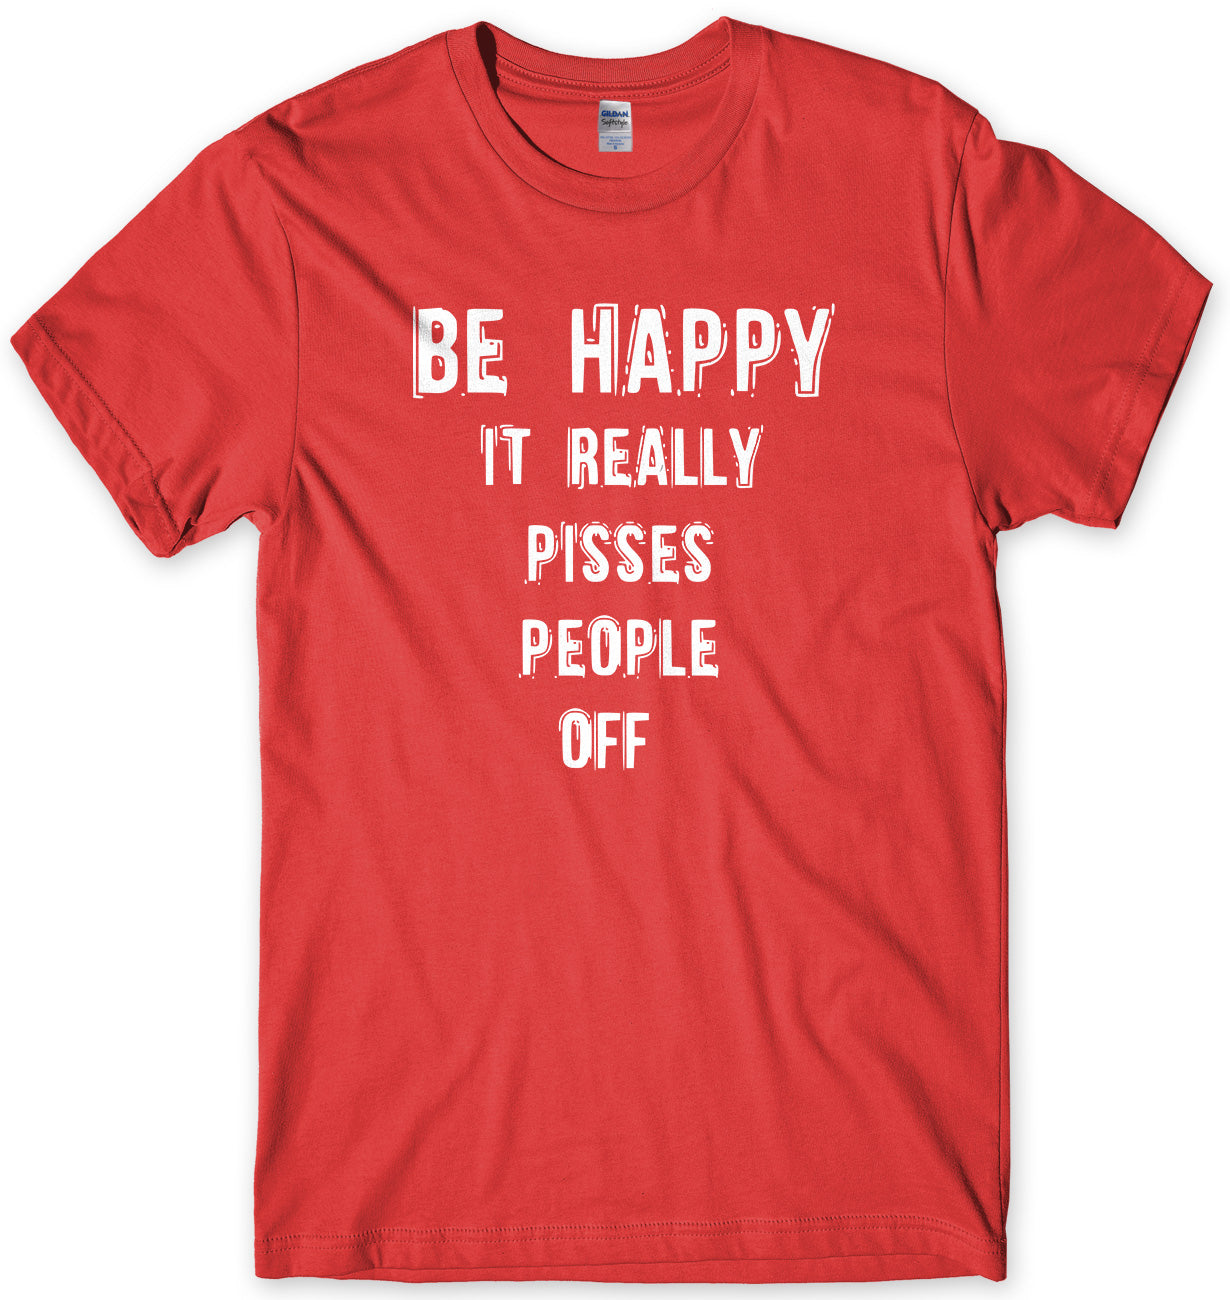 Be Happy It Really Pisses People Off Mens Unisex T-Shirt - StreetSide Surgeons